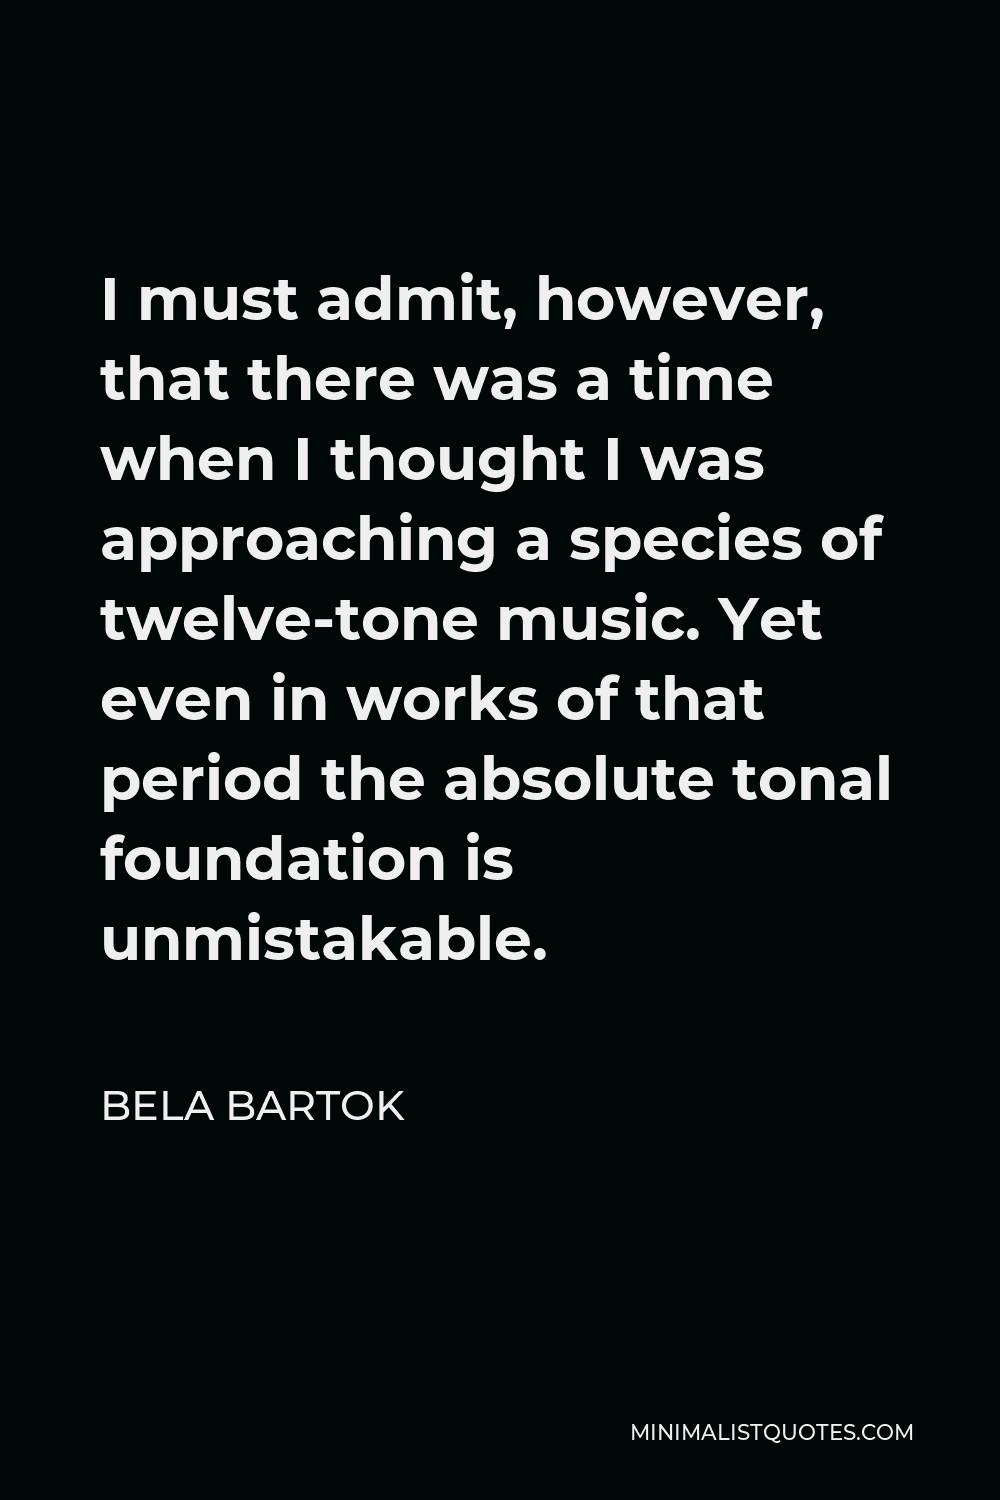 Bela Bartok Quote - I must admit, however, that there was a time when I thought I was approaching a species of twelve-tone music. Yet even in works of that period the absolute tonal foundation is unmistakable.